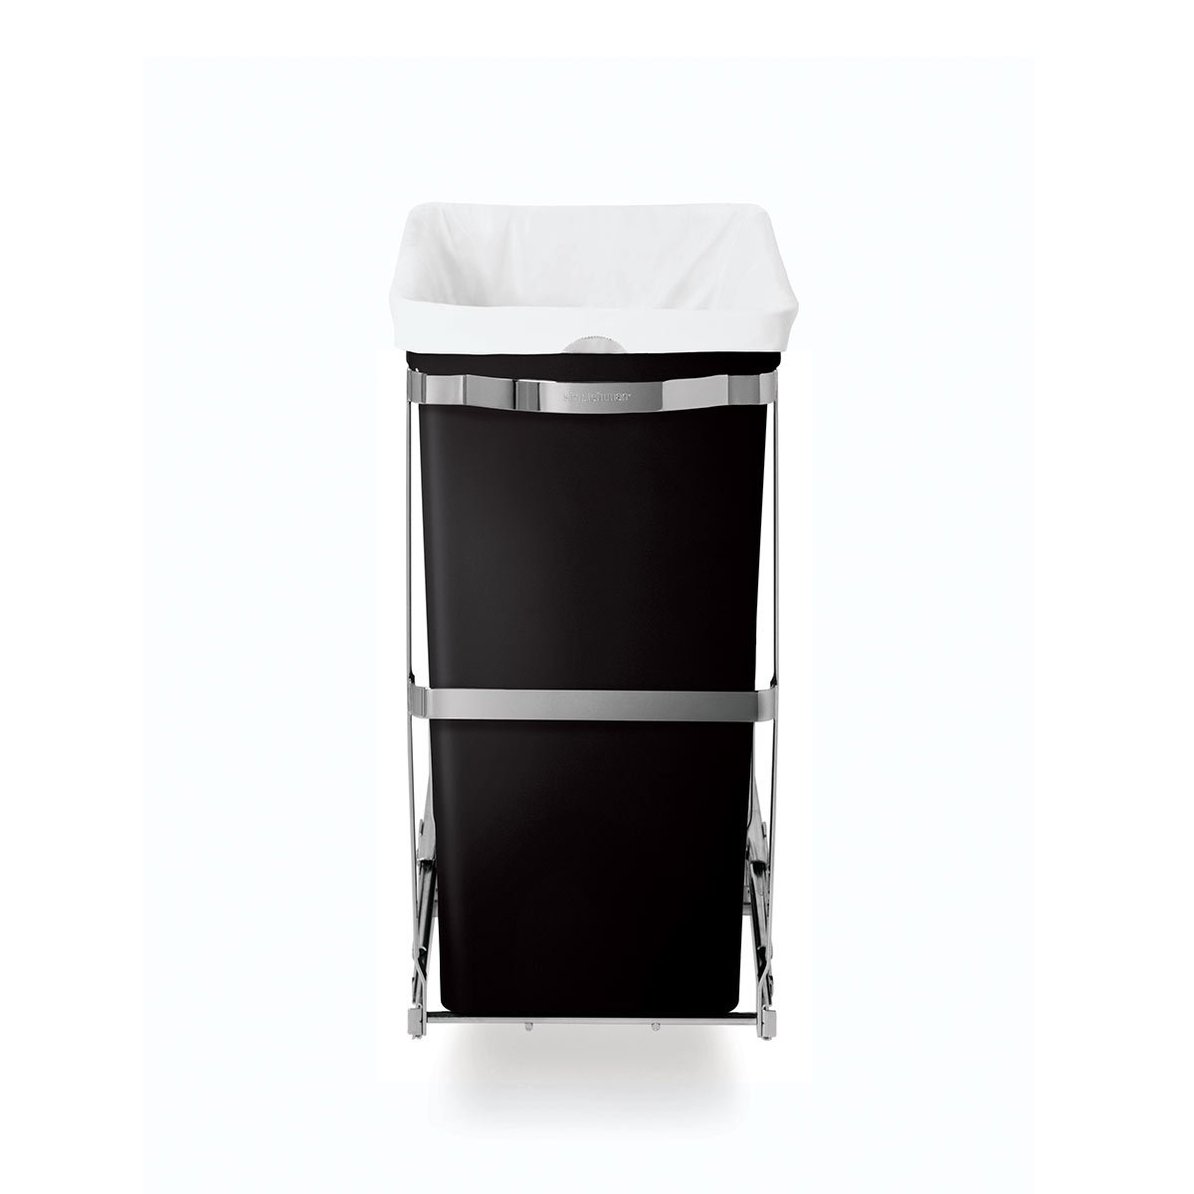 SIMPLEHUMAN UNDER COUNTER PULL-OUT BIN 30L